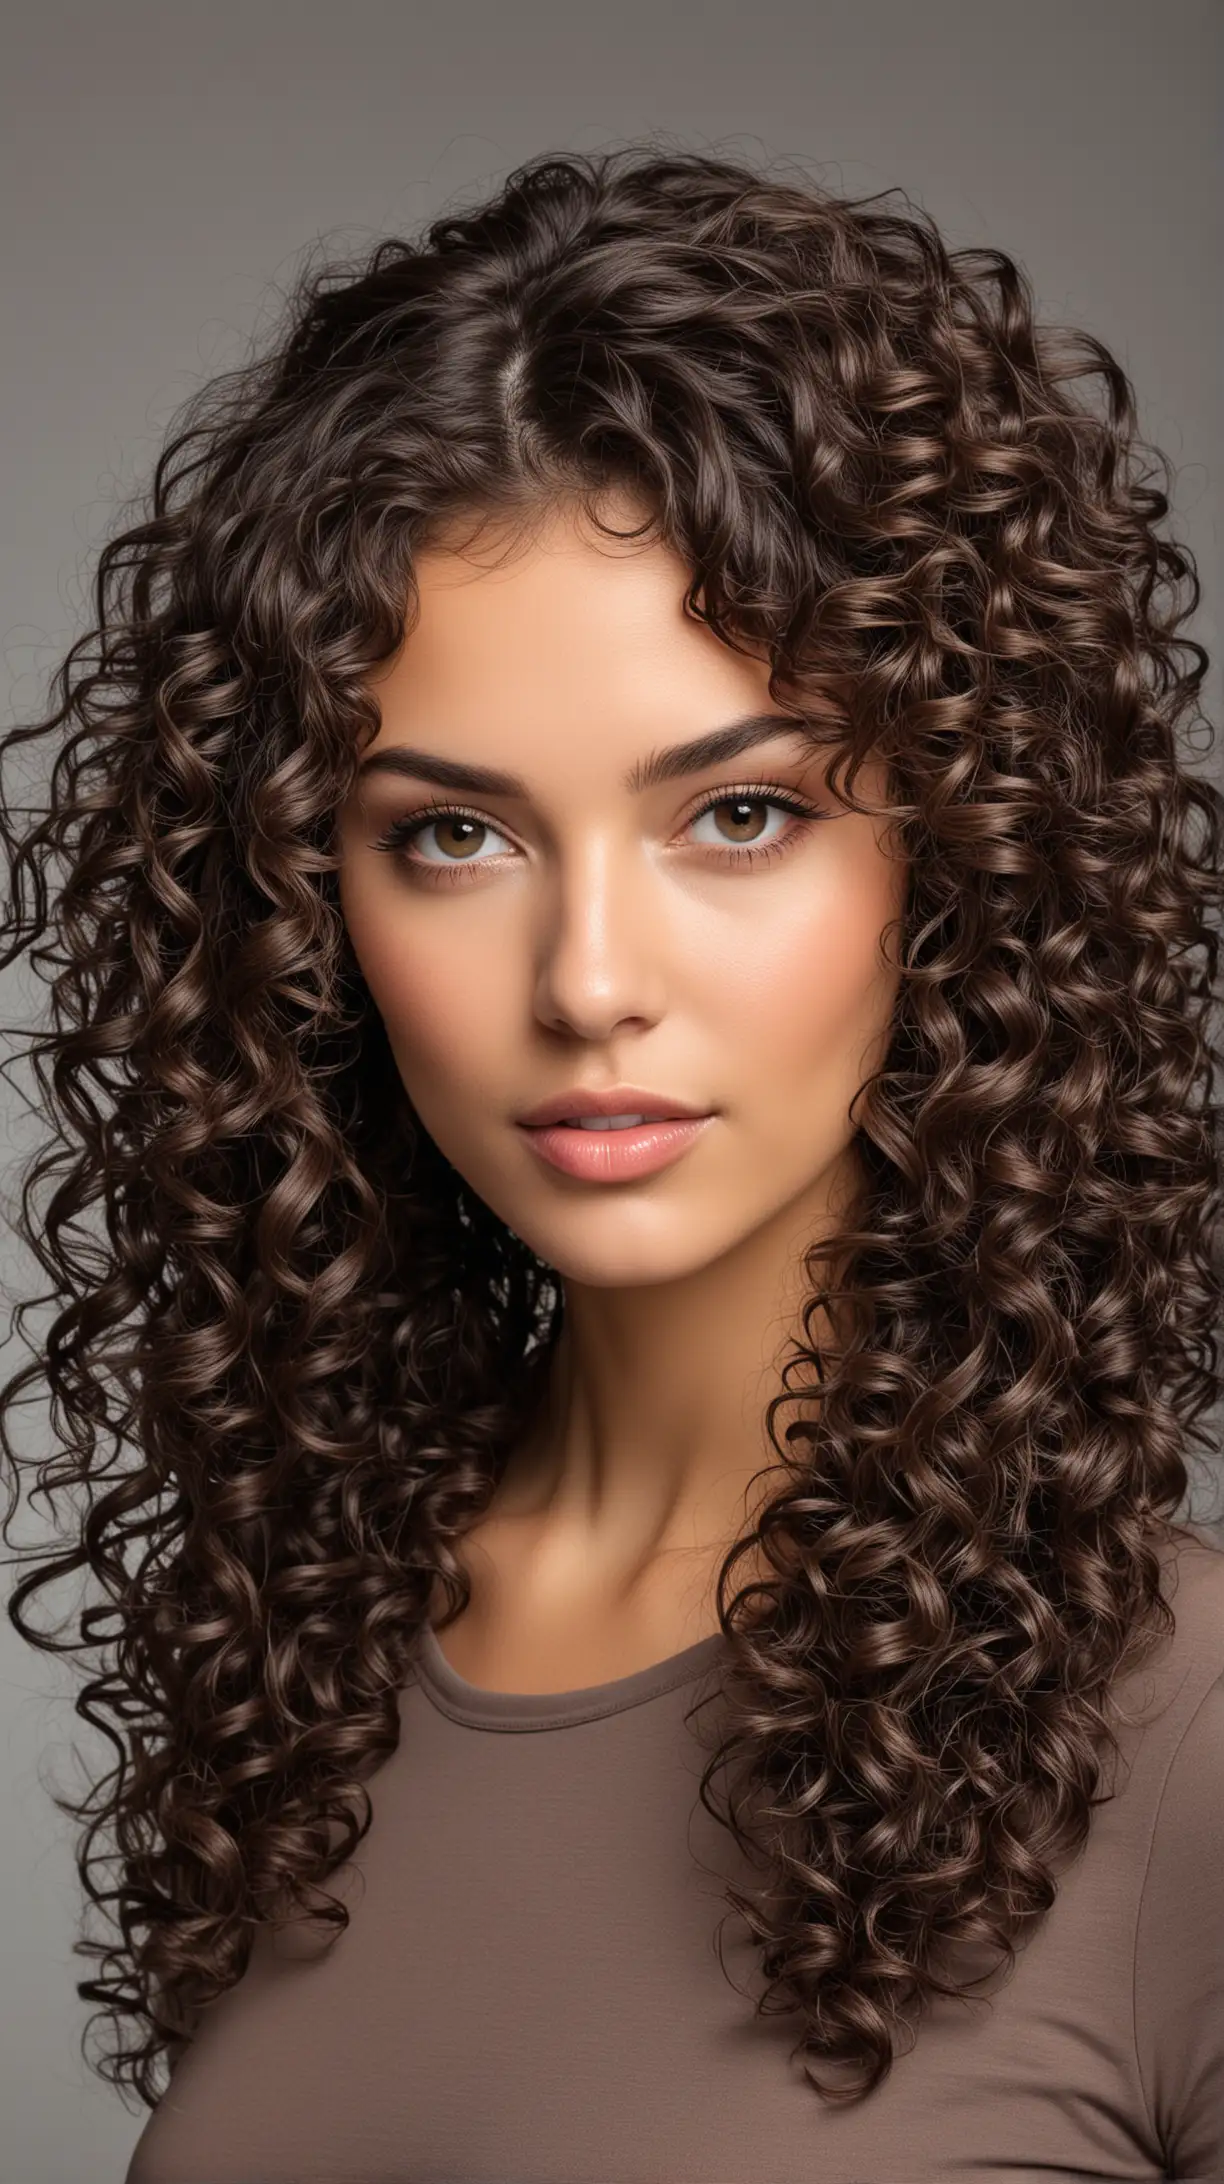 Beautiful model with The Curly Butterfly Cascade haircut, thick curly hair, age 30, urban origin 